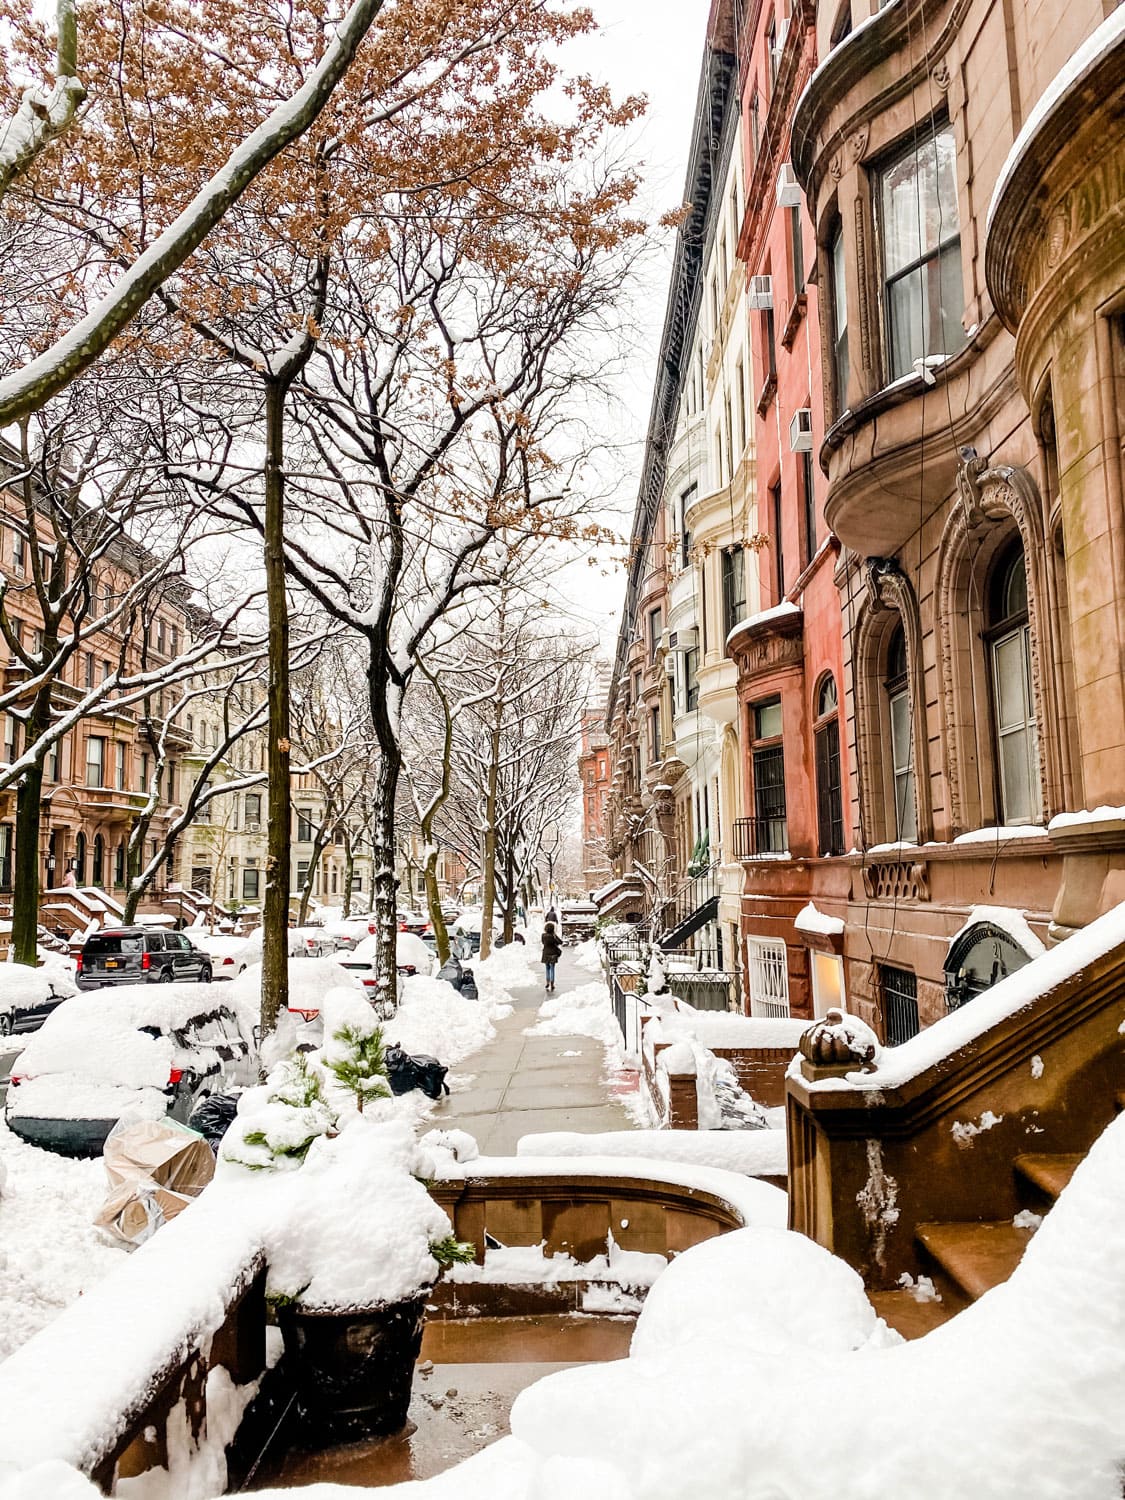 city street in the snow with brownstones